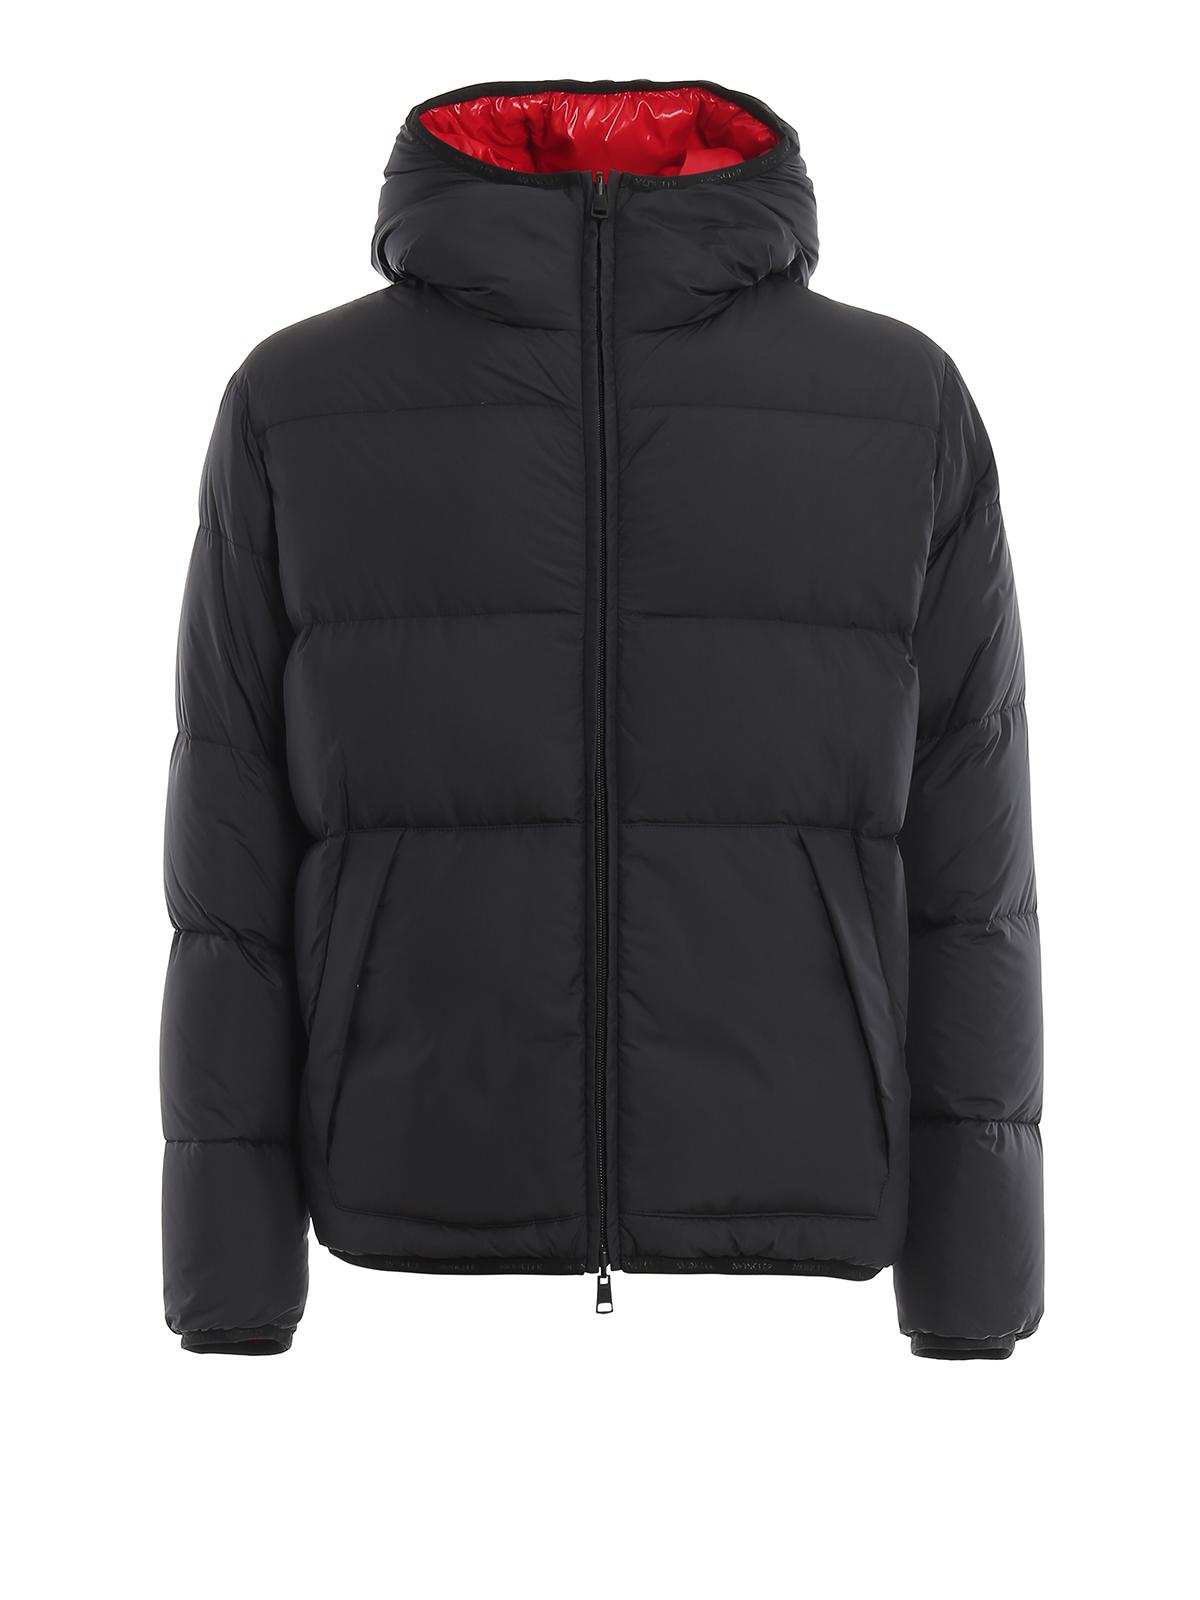 Moncler Synthetic Lumiere Reversible Puffer Jacket in Black for Men - Lyst